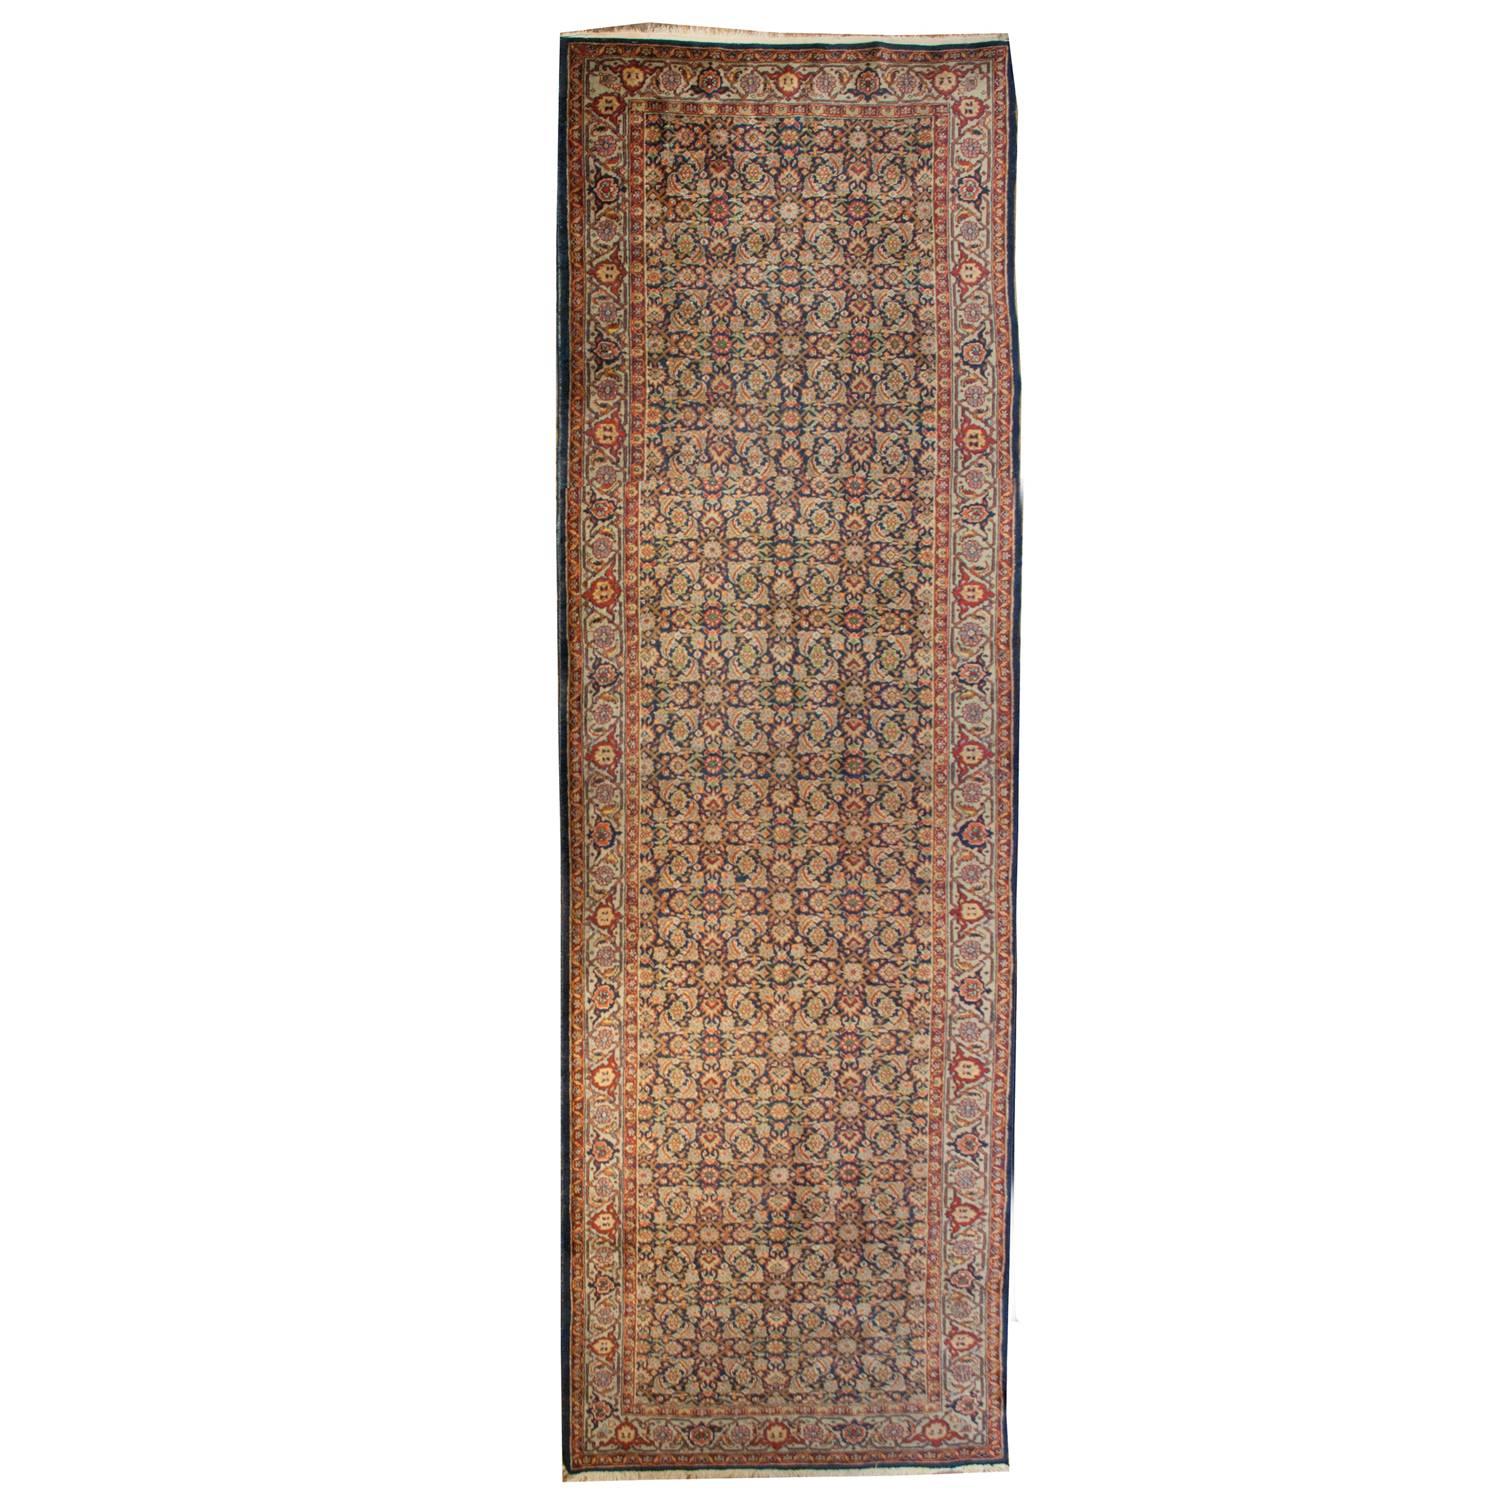 Early 20th Century Tabriz Runner For Sale